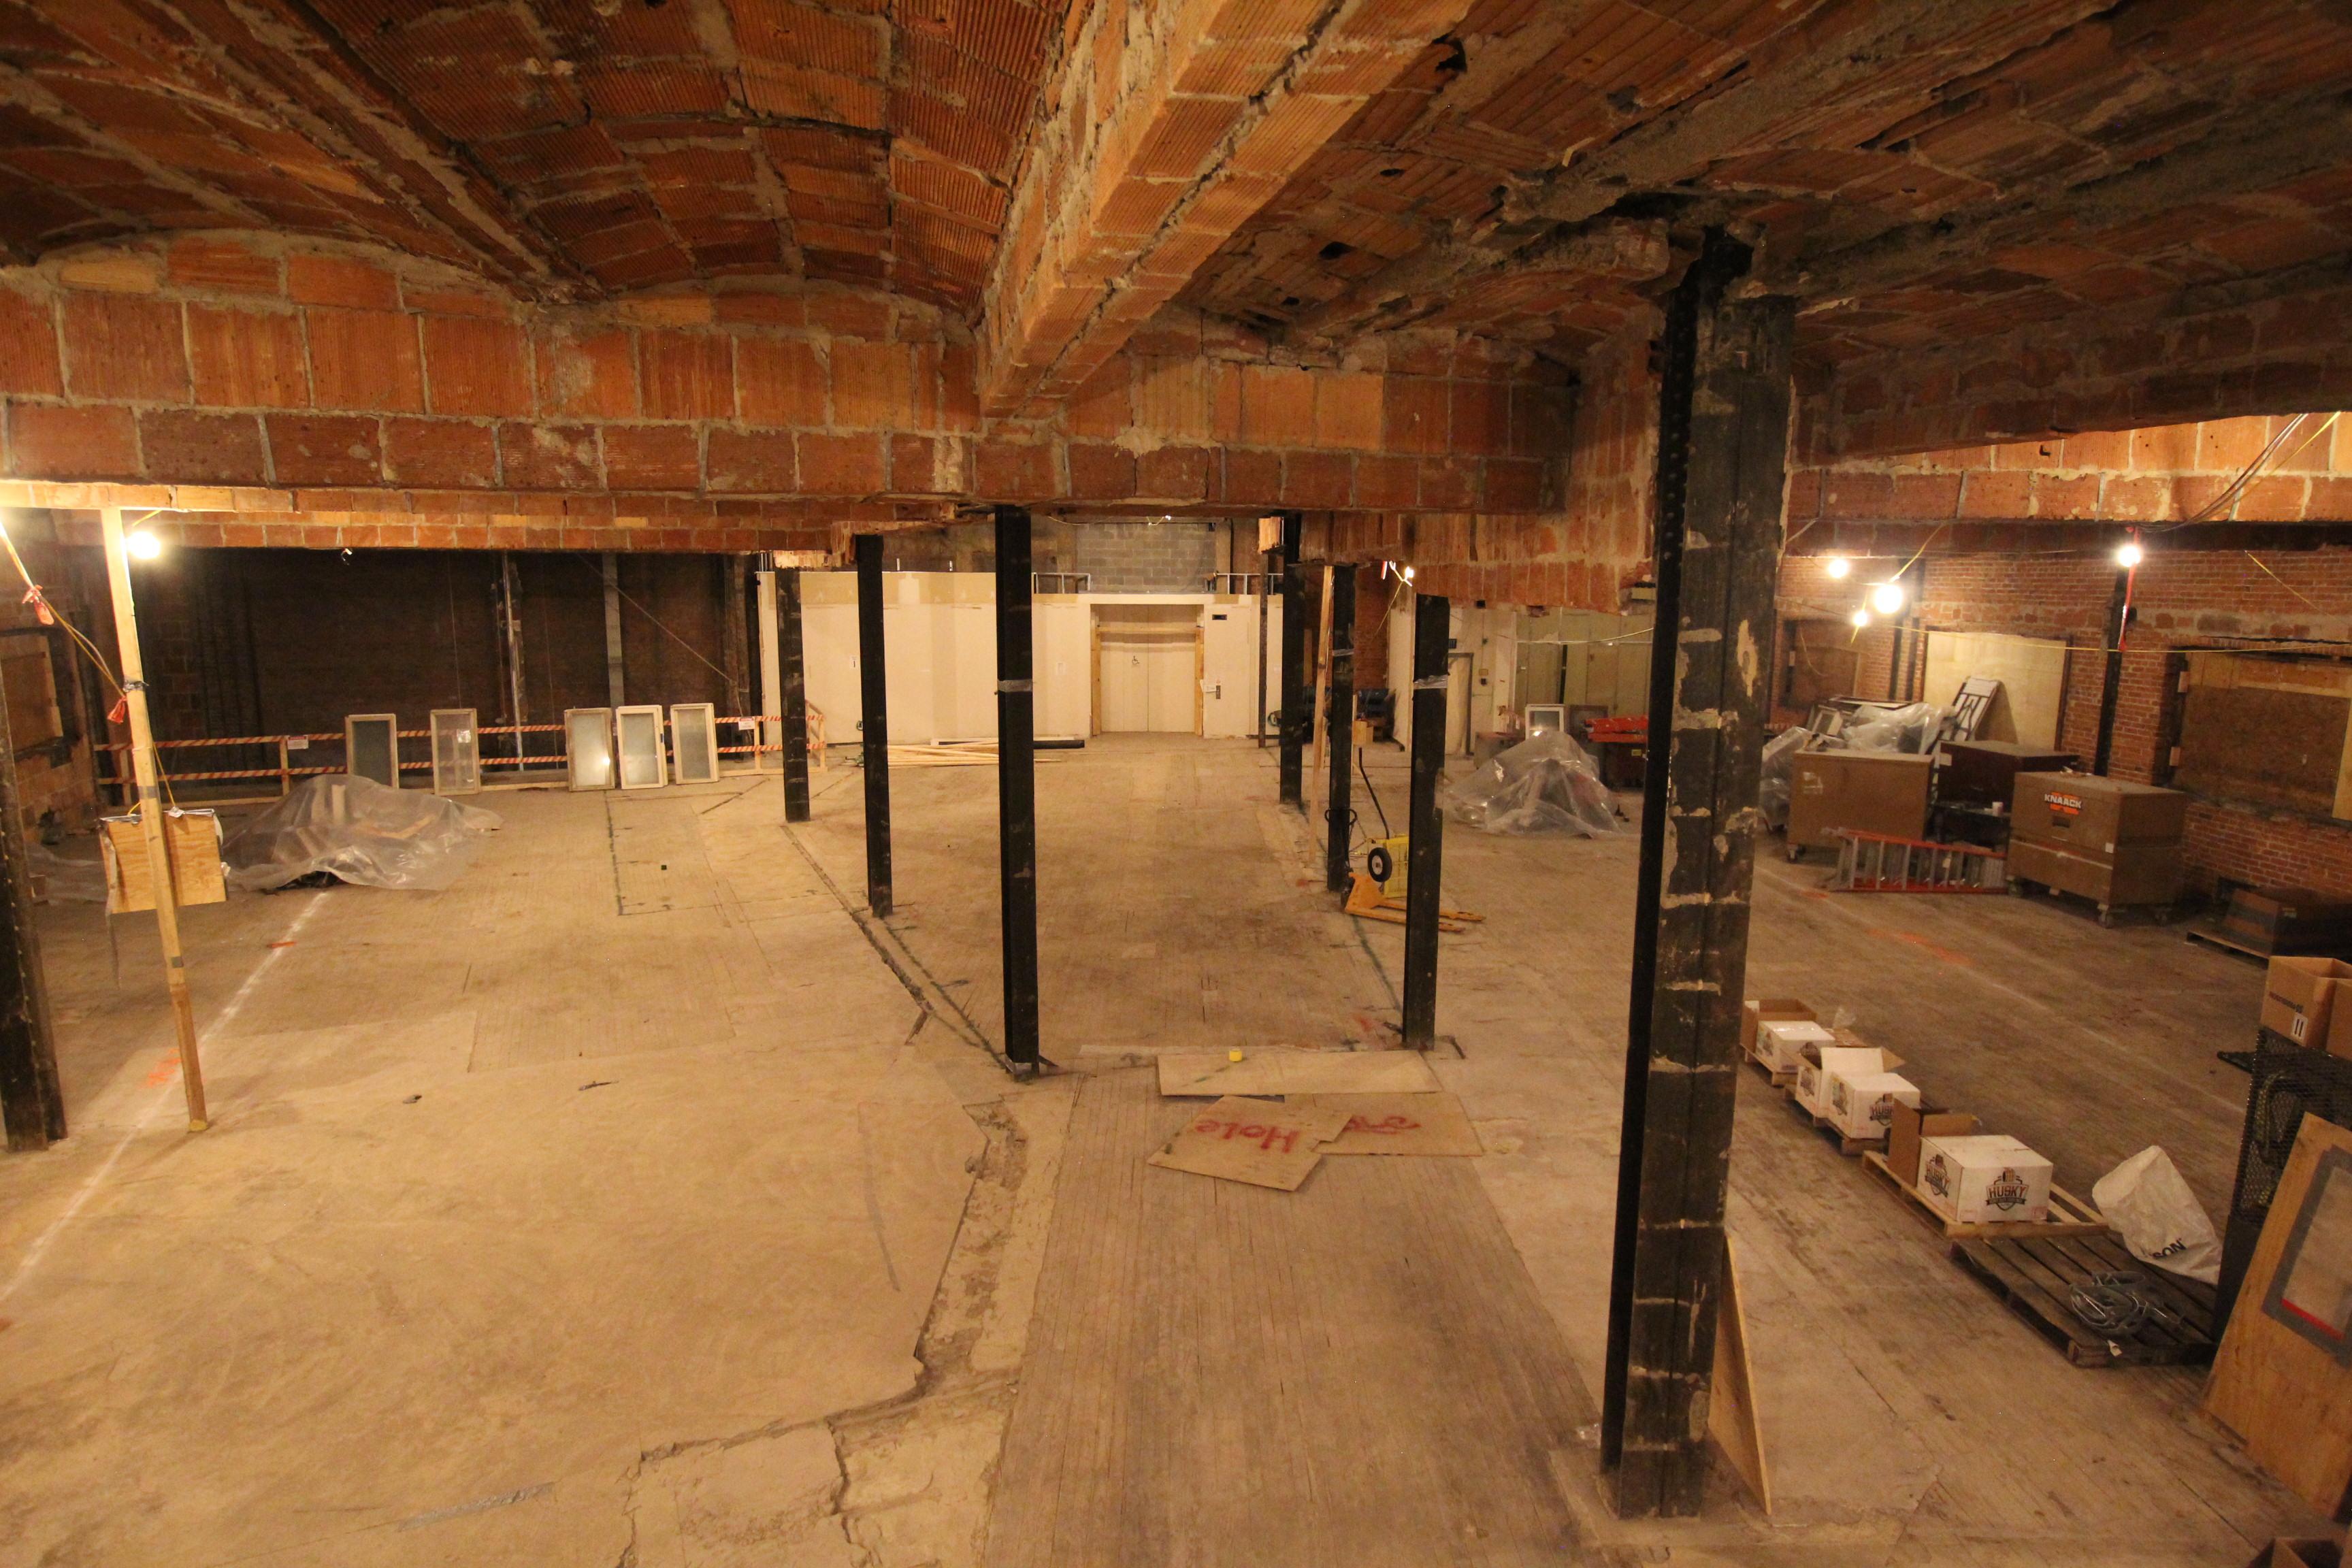 Interior of museum's 4th floor demo with exposed brick, bare floors, and metal supports.